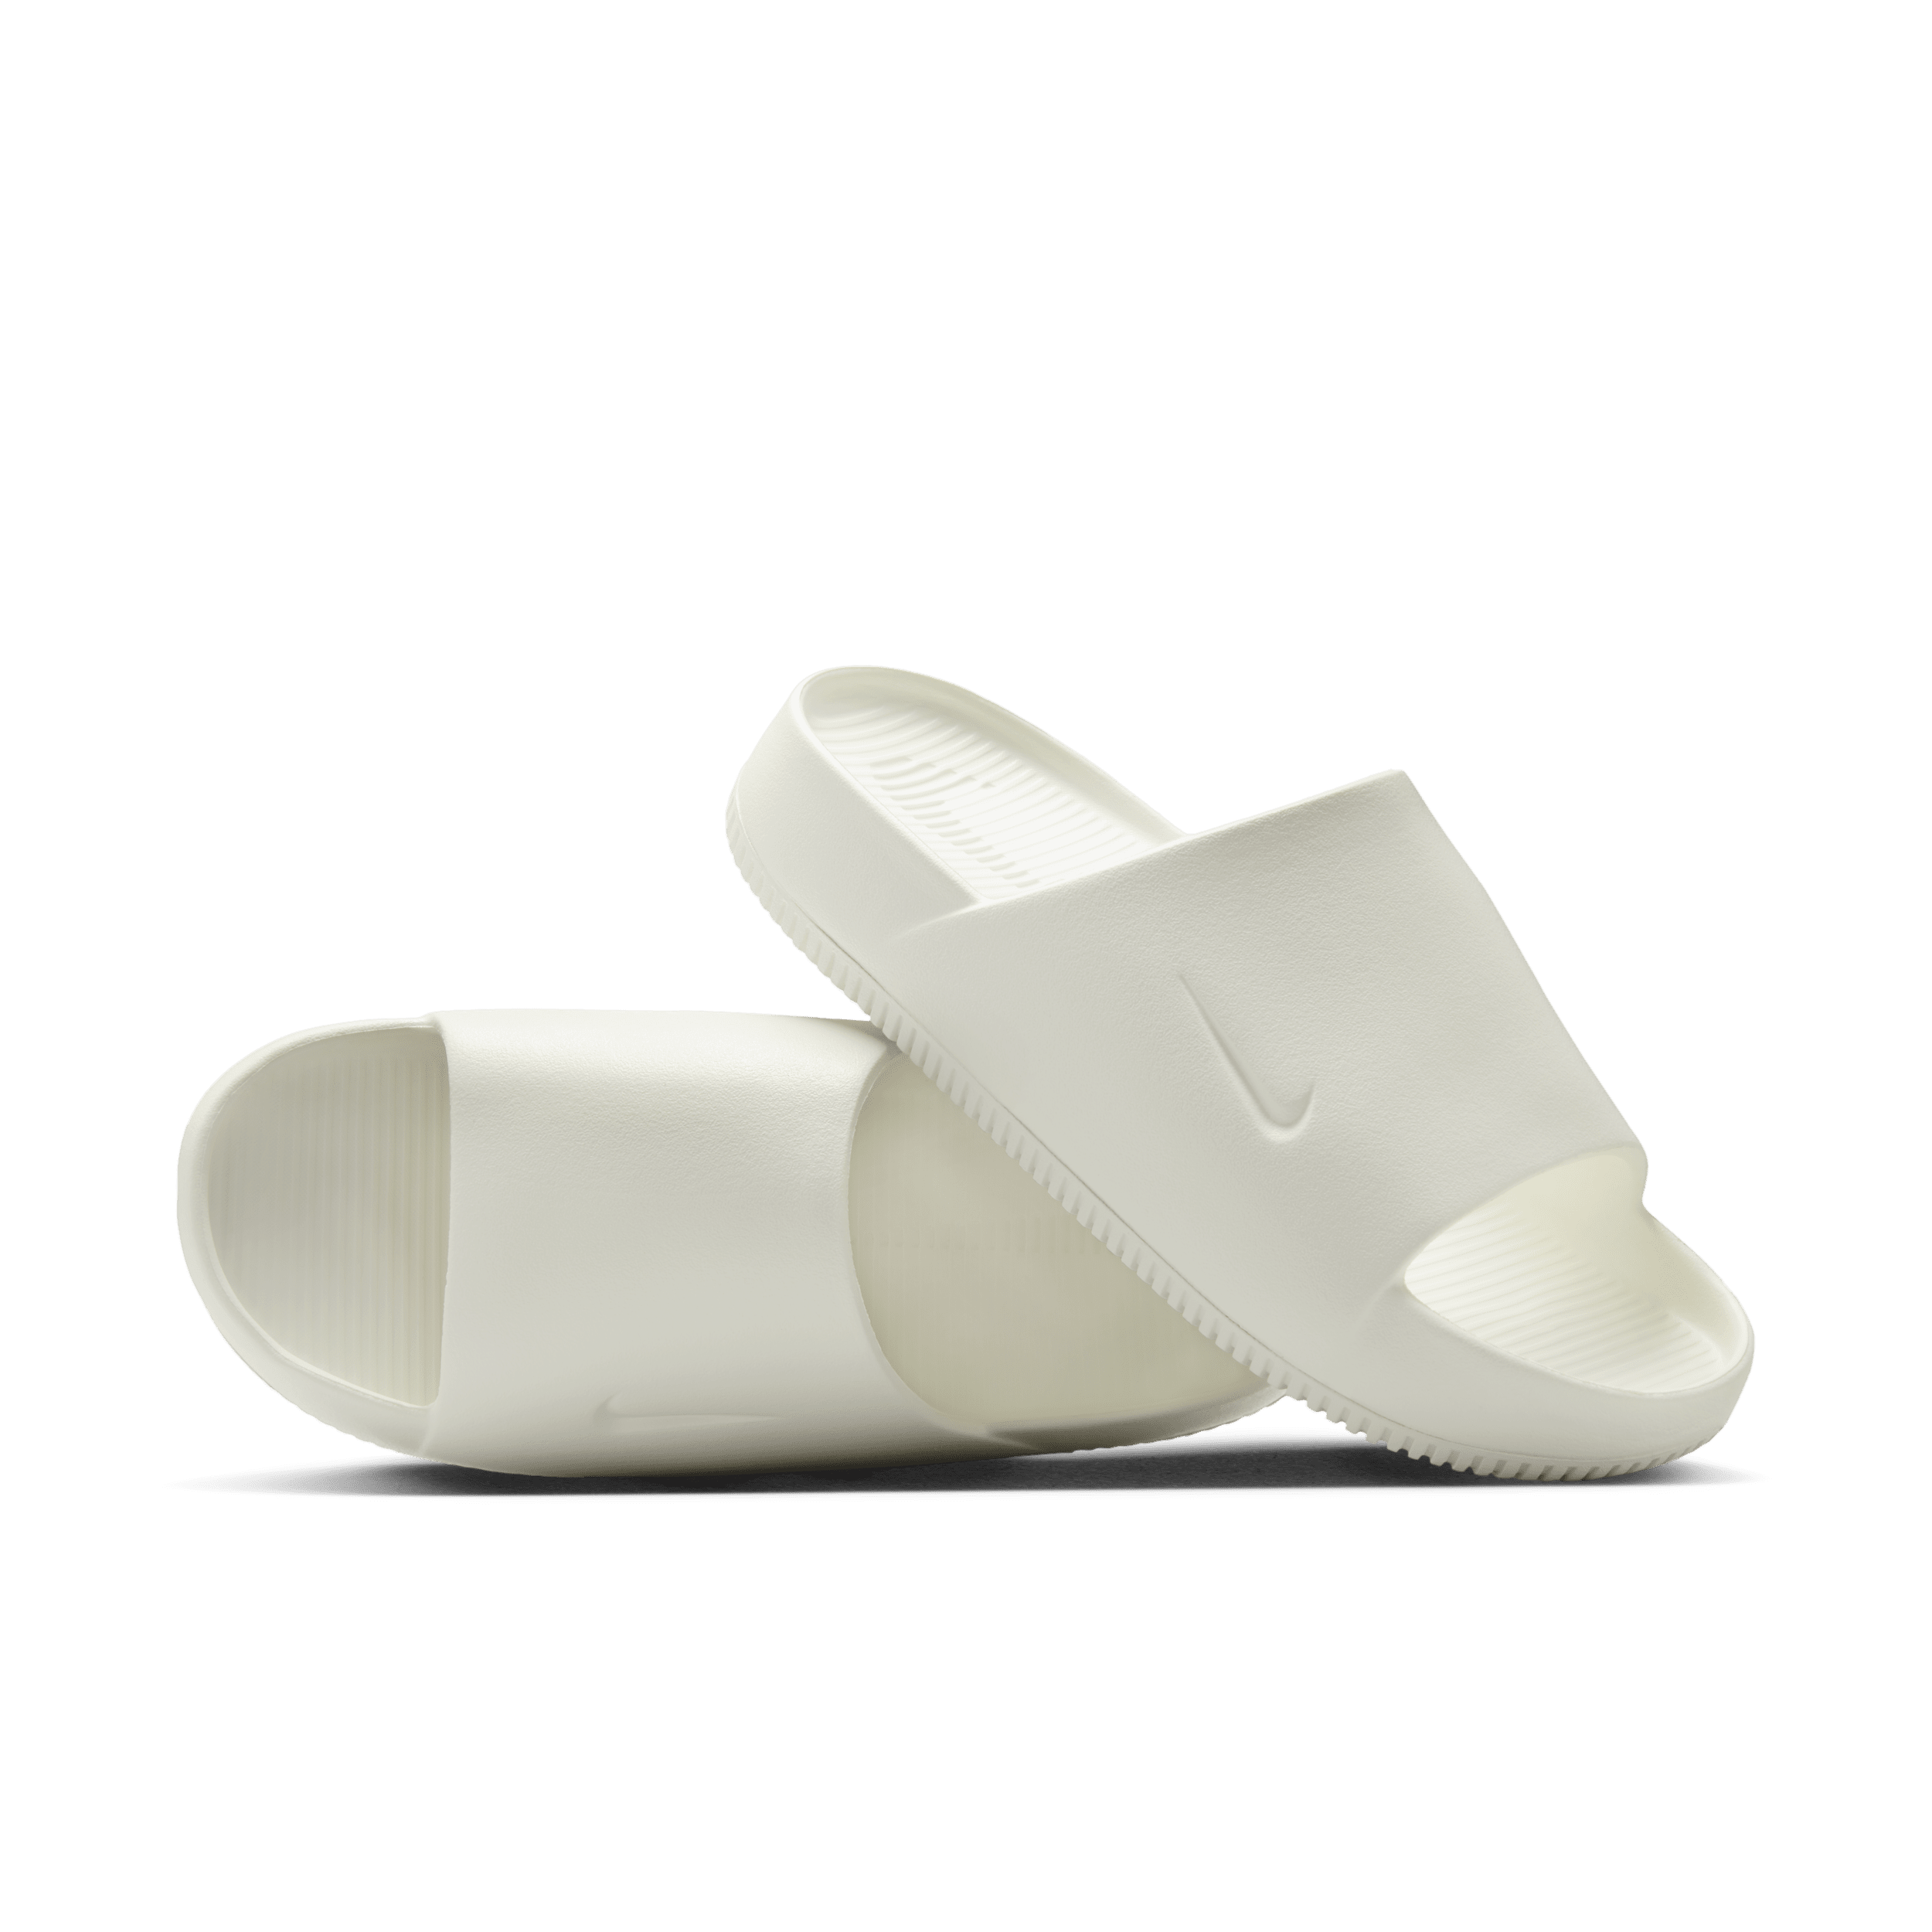 Nike Calm slippers voor dames - Wit